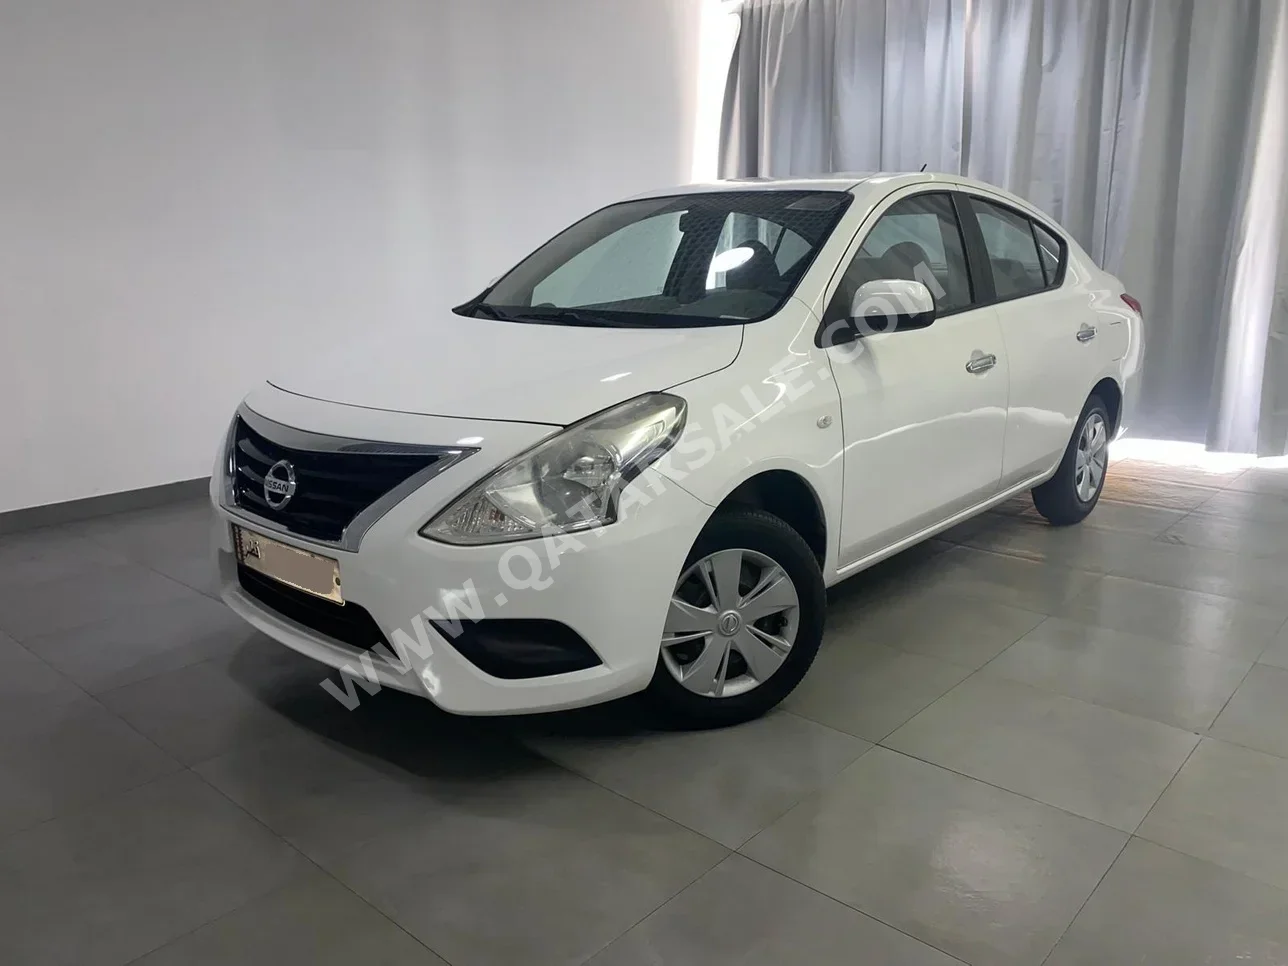 Nissan  Sunny  2020  Automatic  58,700 Km  4 Cylinder  Front Wheel Drive (FWD)  Sedan  White